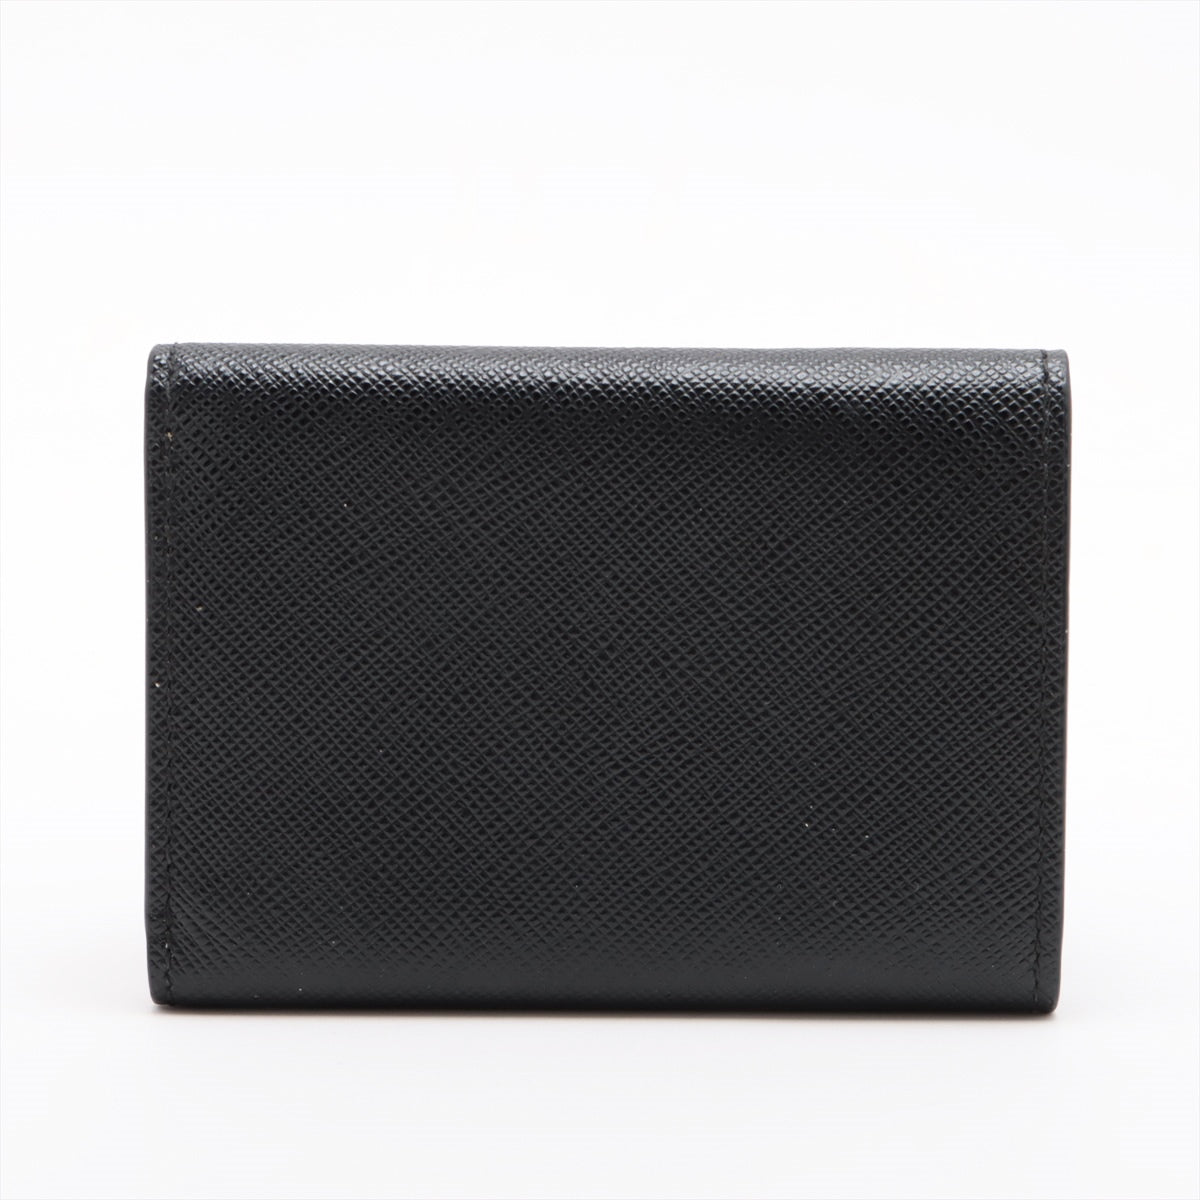 Prada 1MH021 Leather Compact Wallet Black